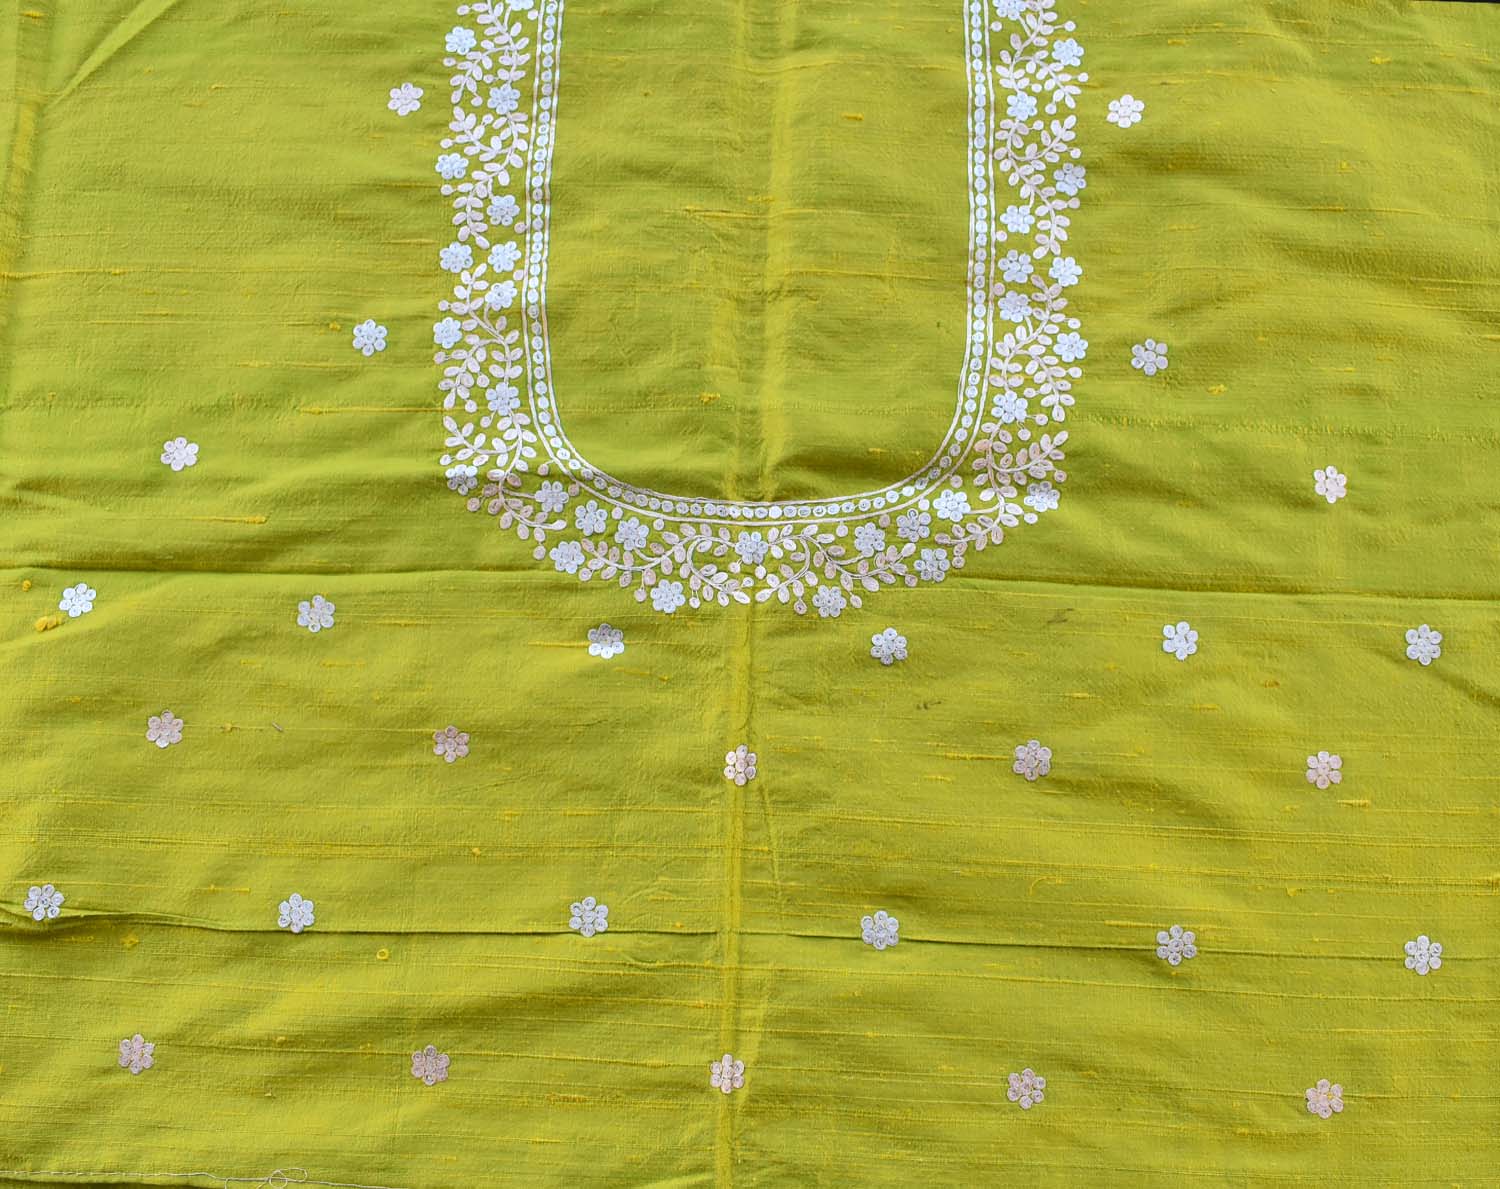 Raw Silk Fabric with Pitta work Embroidery – India1001.com